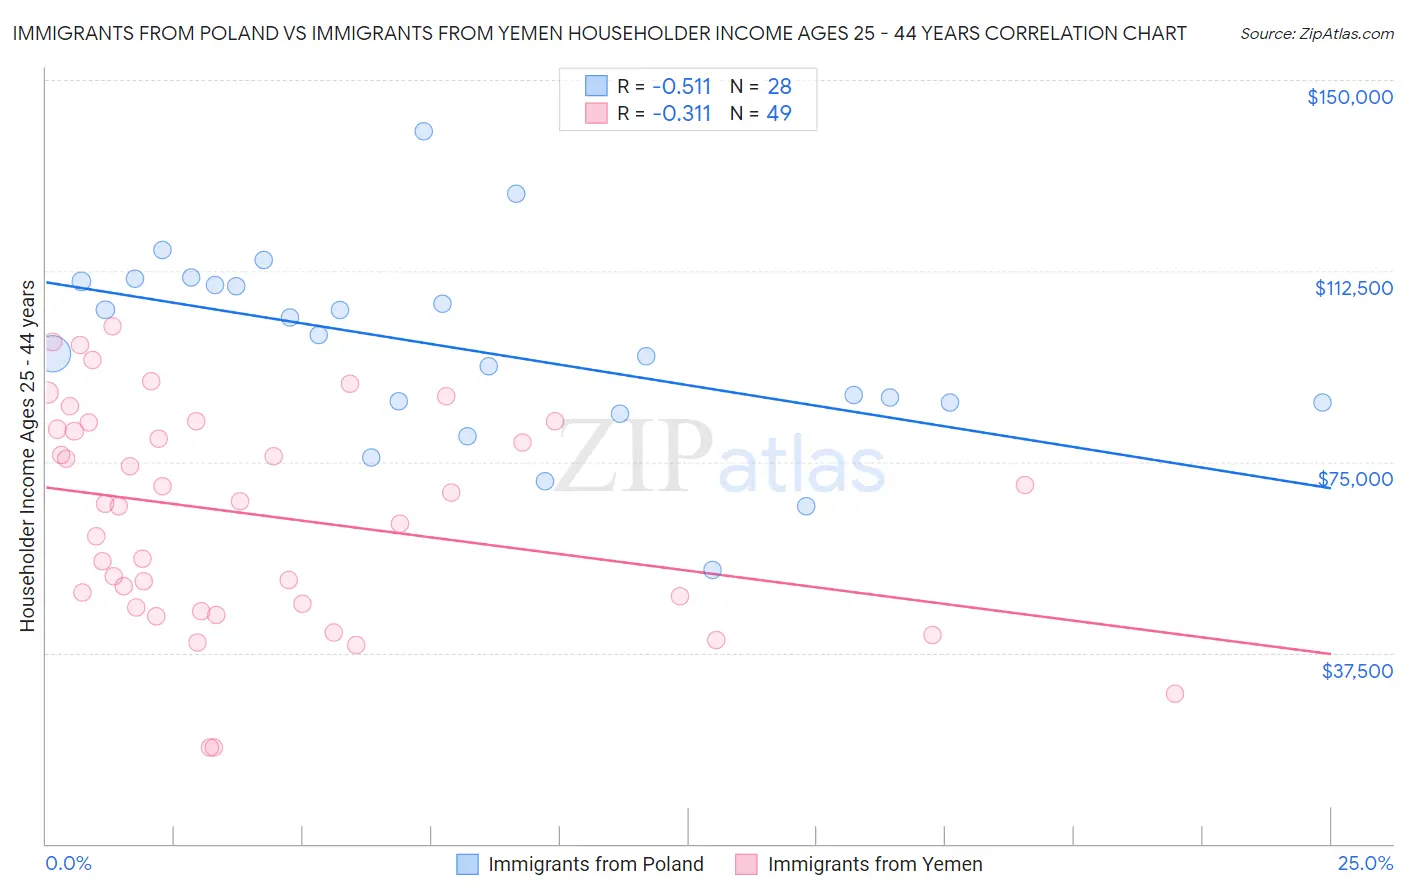 Immigrants from Poland vs Immigrants from Yemen Householder Income Ages 25 - 44 years